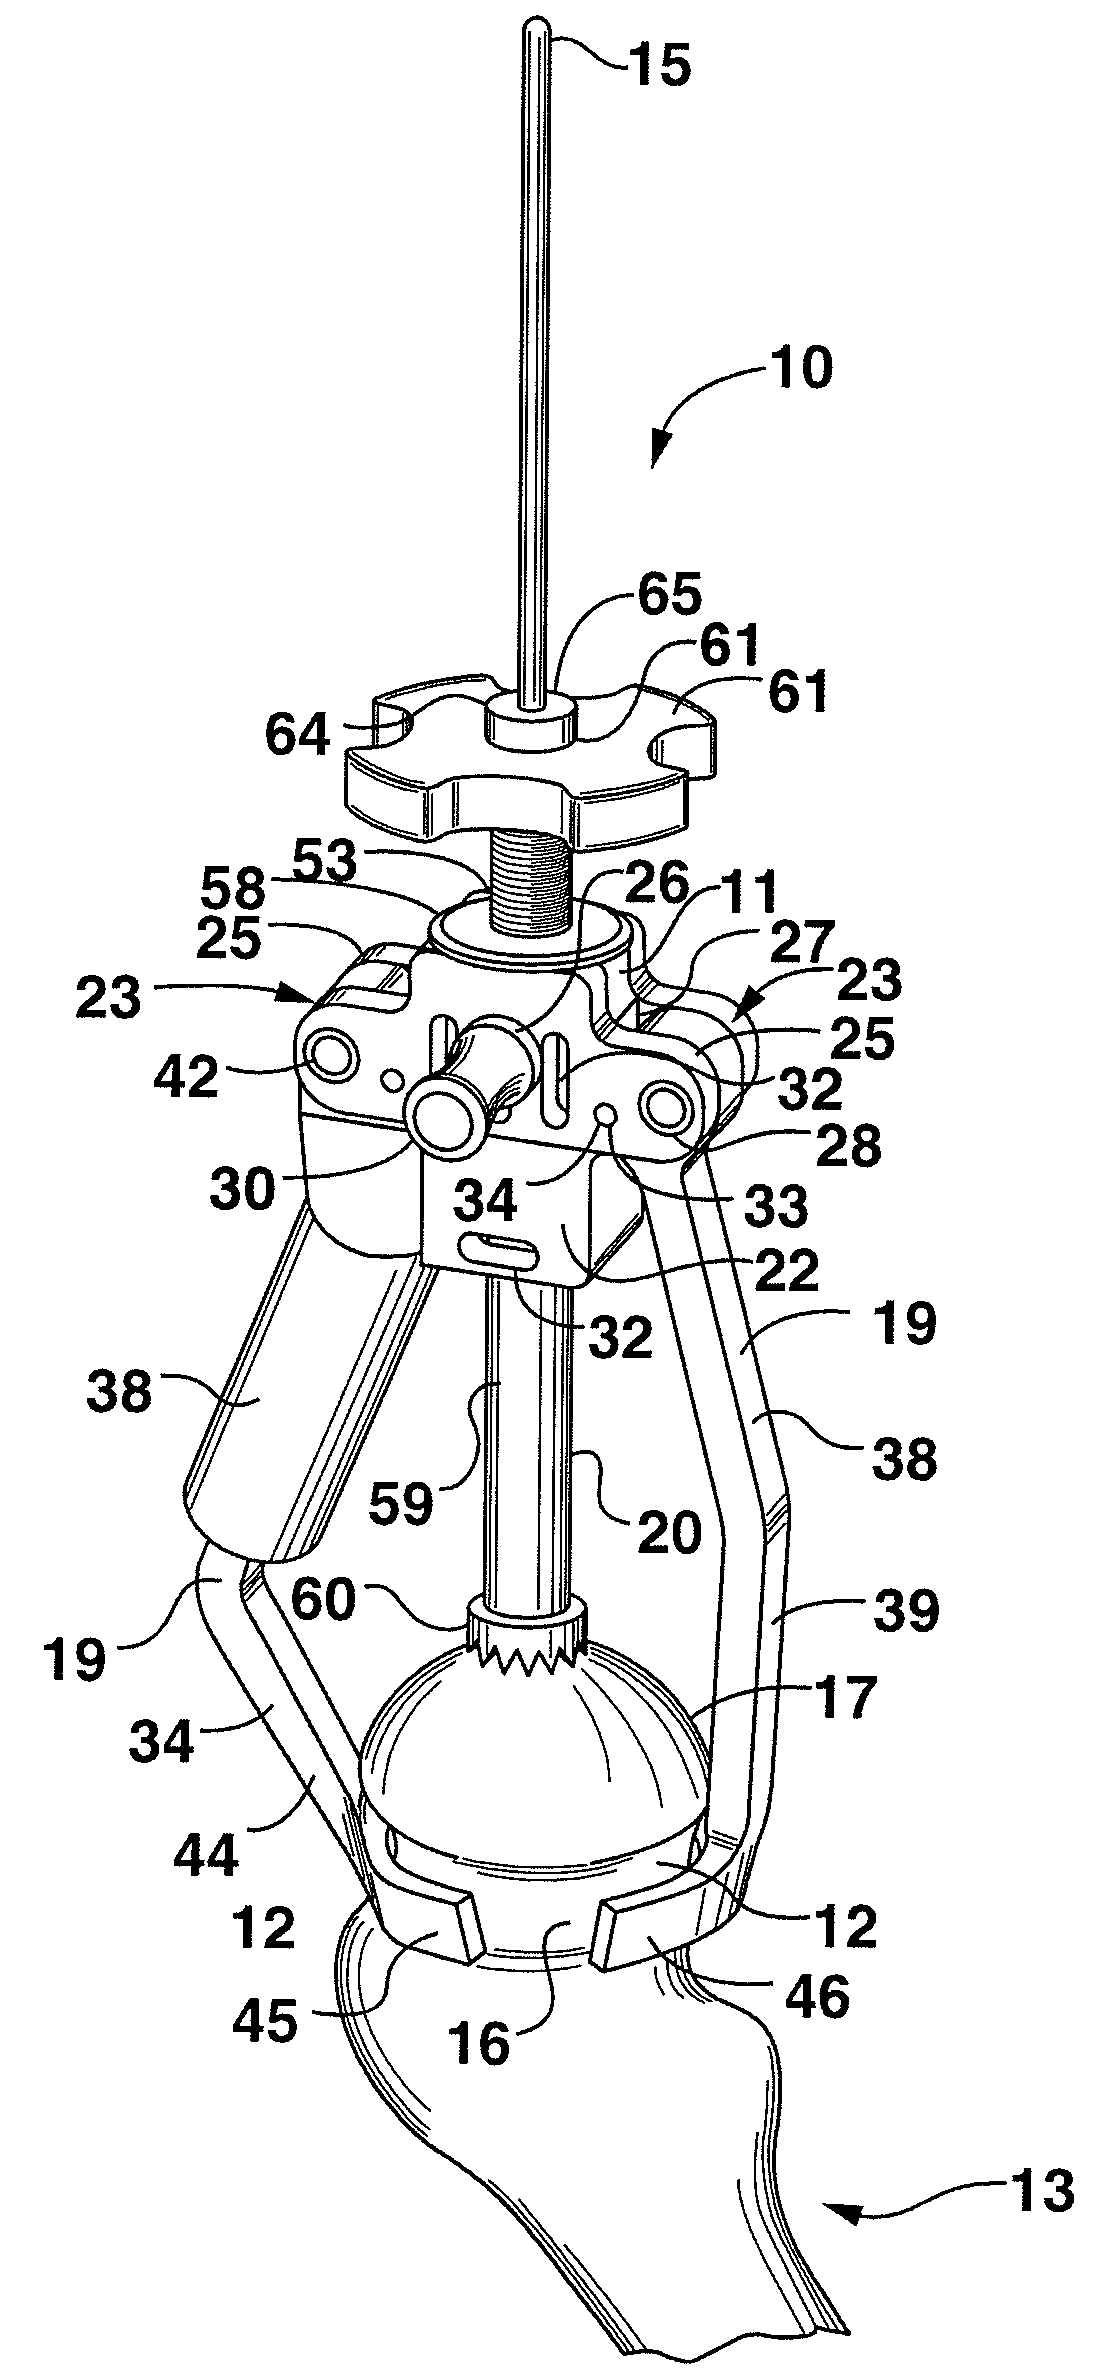 Guide clamp for guiding placement of a guide wire in a femur